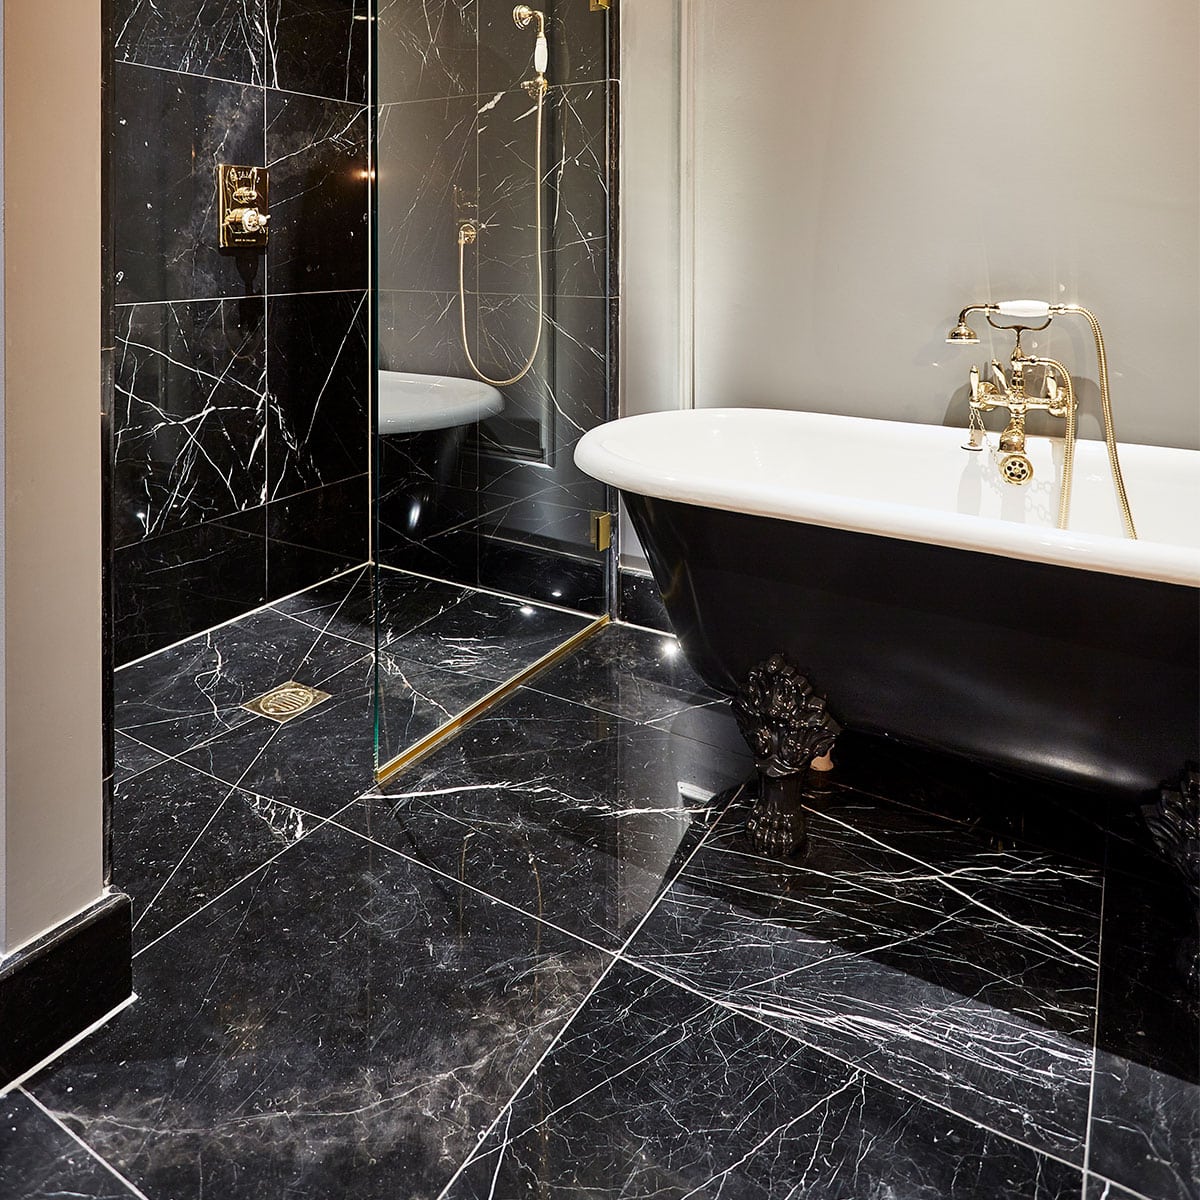 Nero Marquina Natural Marble Tiles Bathroom Shower IvySpace